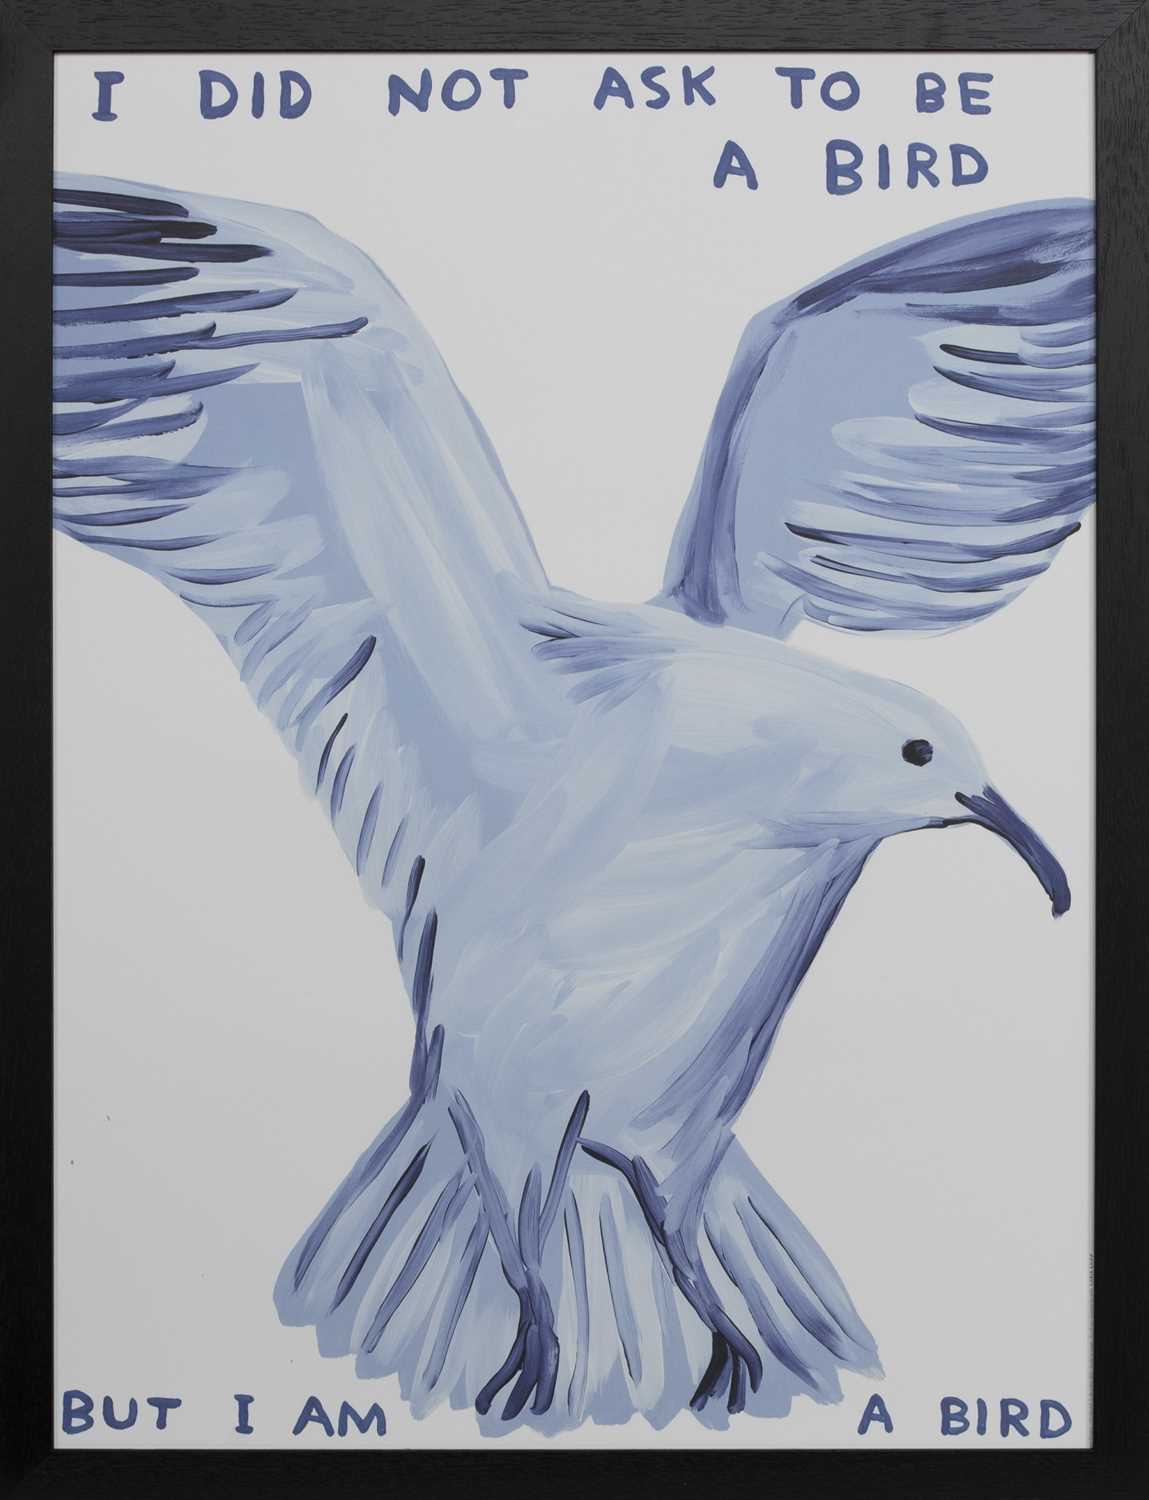 I DID NOT ASK TO BE A BIRD, A LITHOGRAPH BY DAVID SHRIGLEY